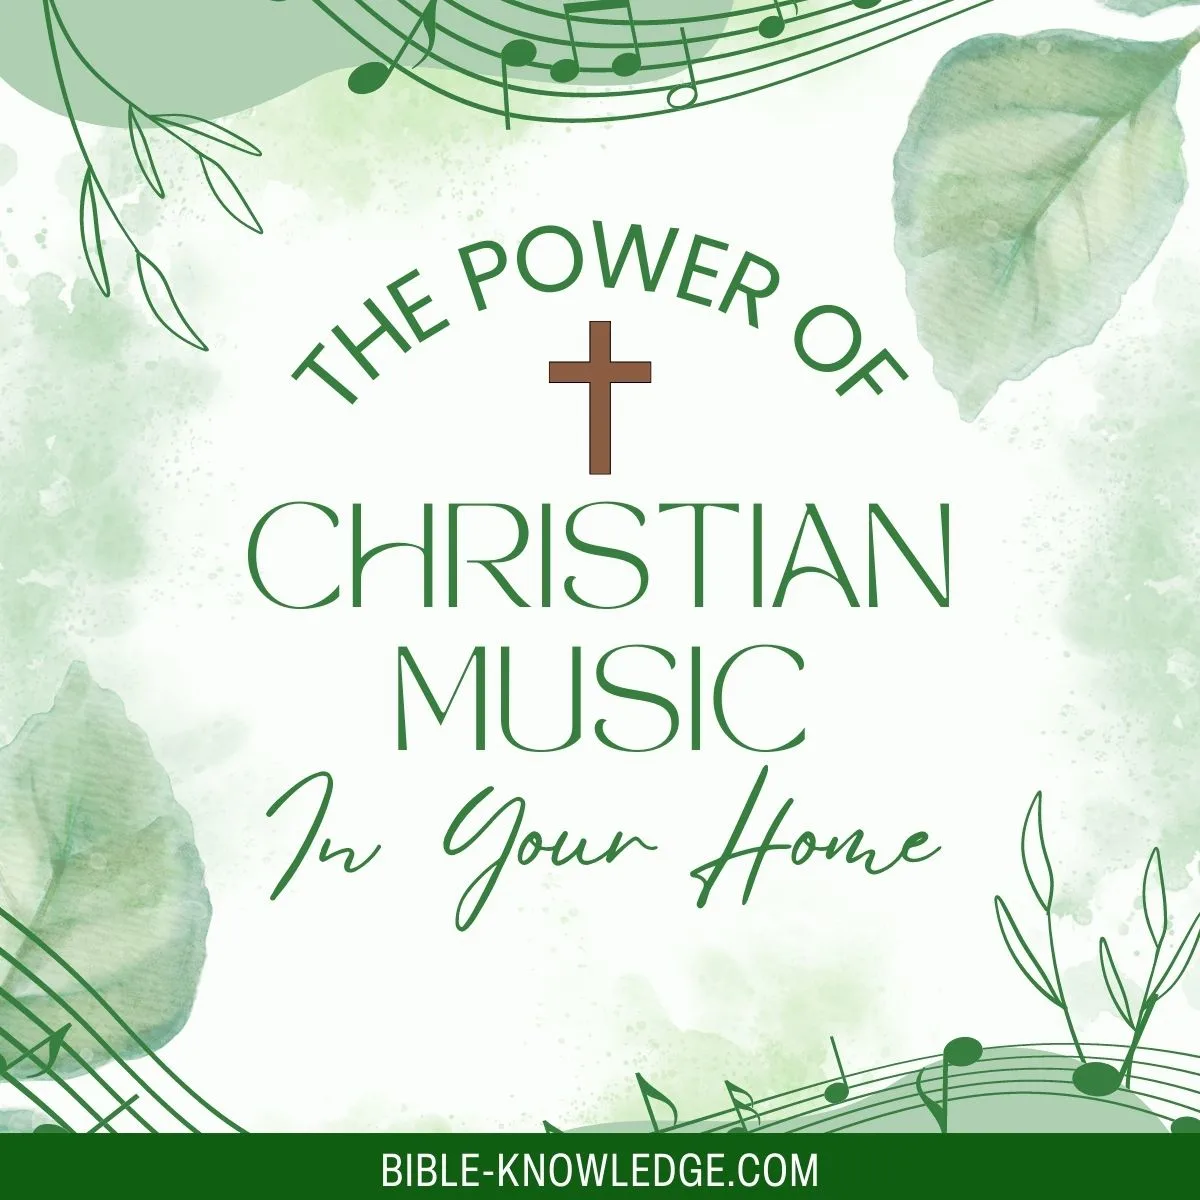 The Power of Christian Music in Your Home